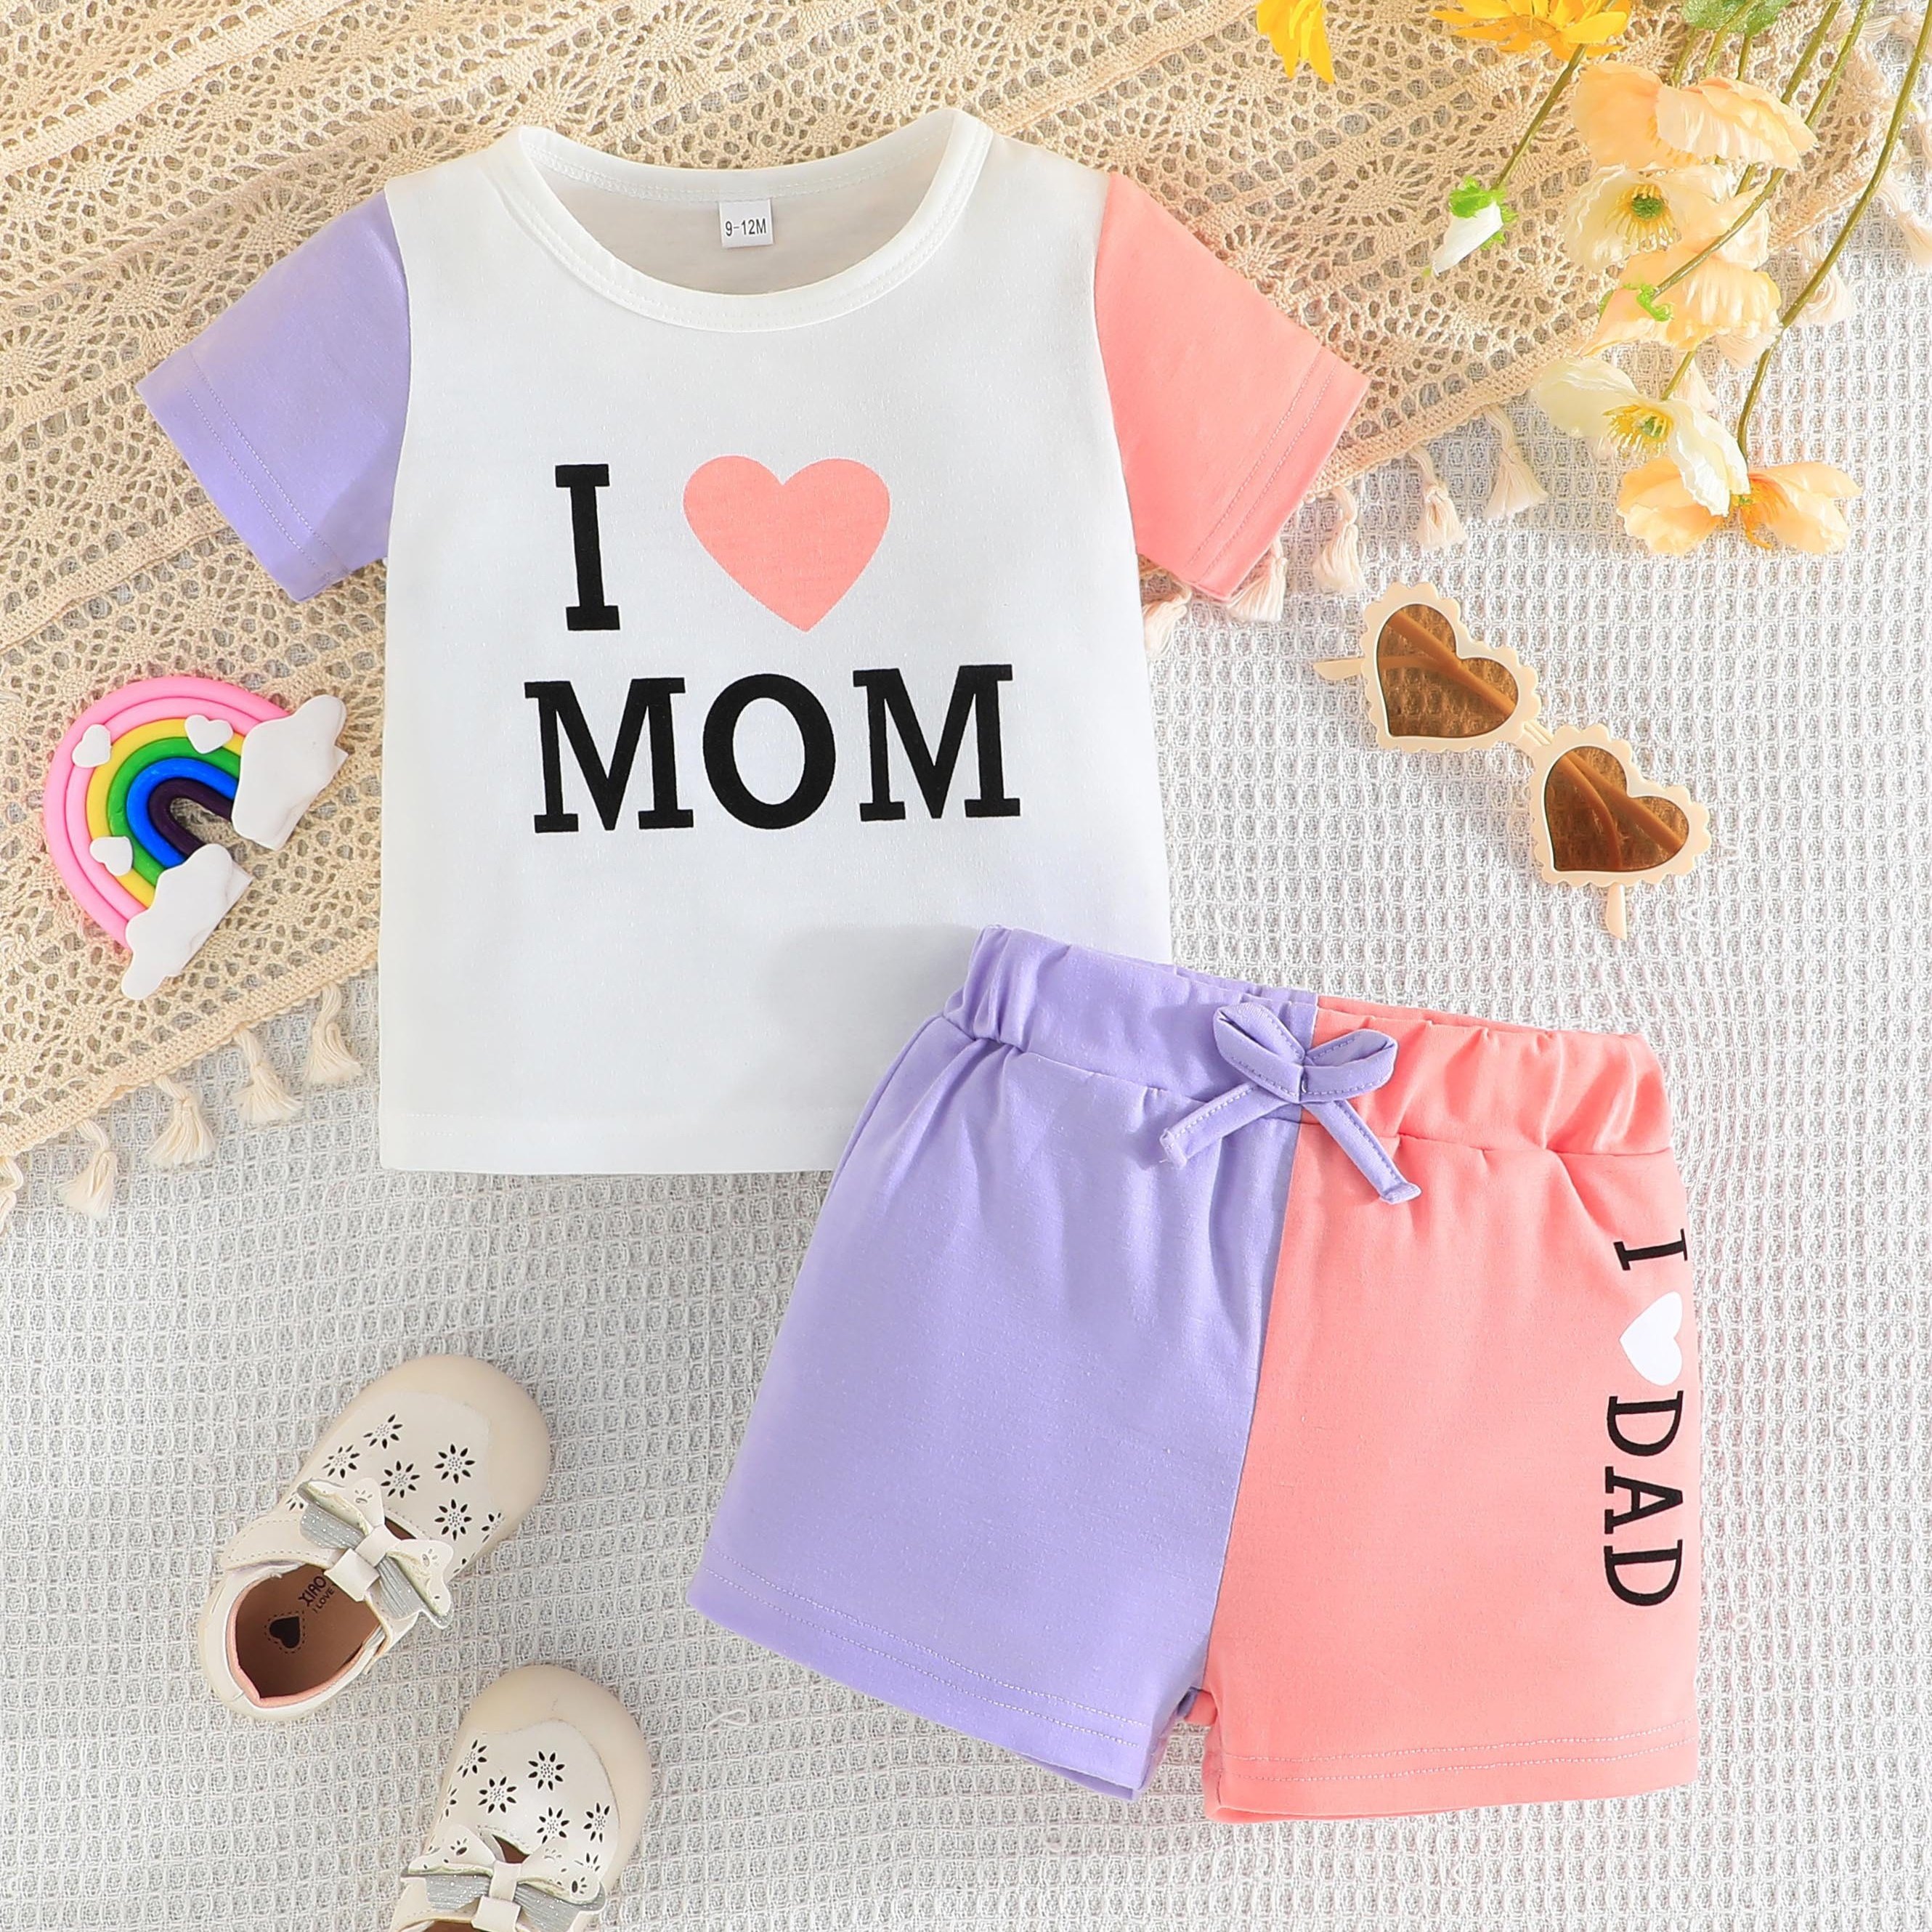 

Baby's "i Love Mom" Print 2pcs Color Clash Outfit, T-shirt & Shorts Set, Toddler & Infant Girl's Clothes For Summer